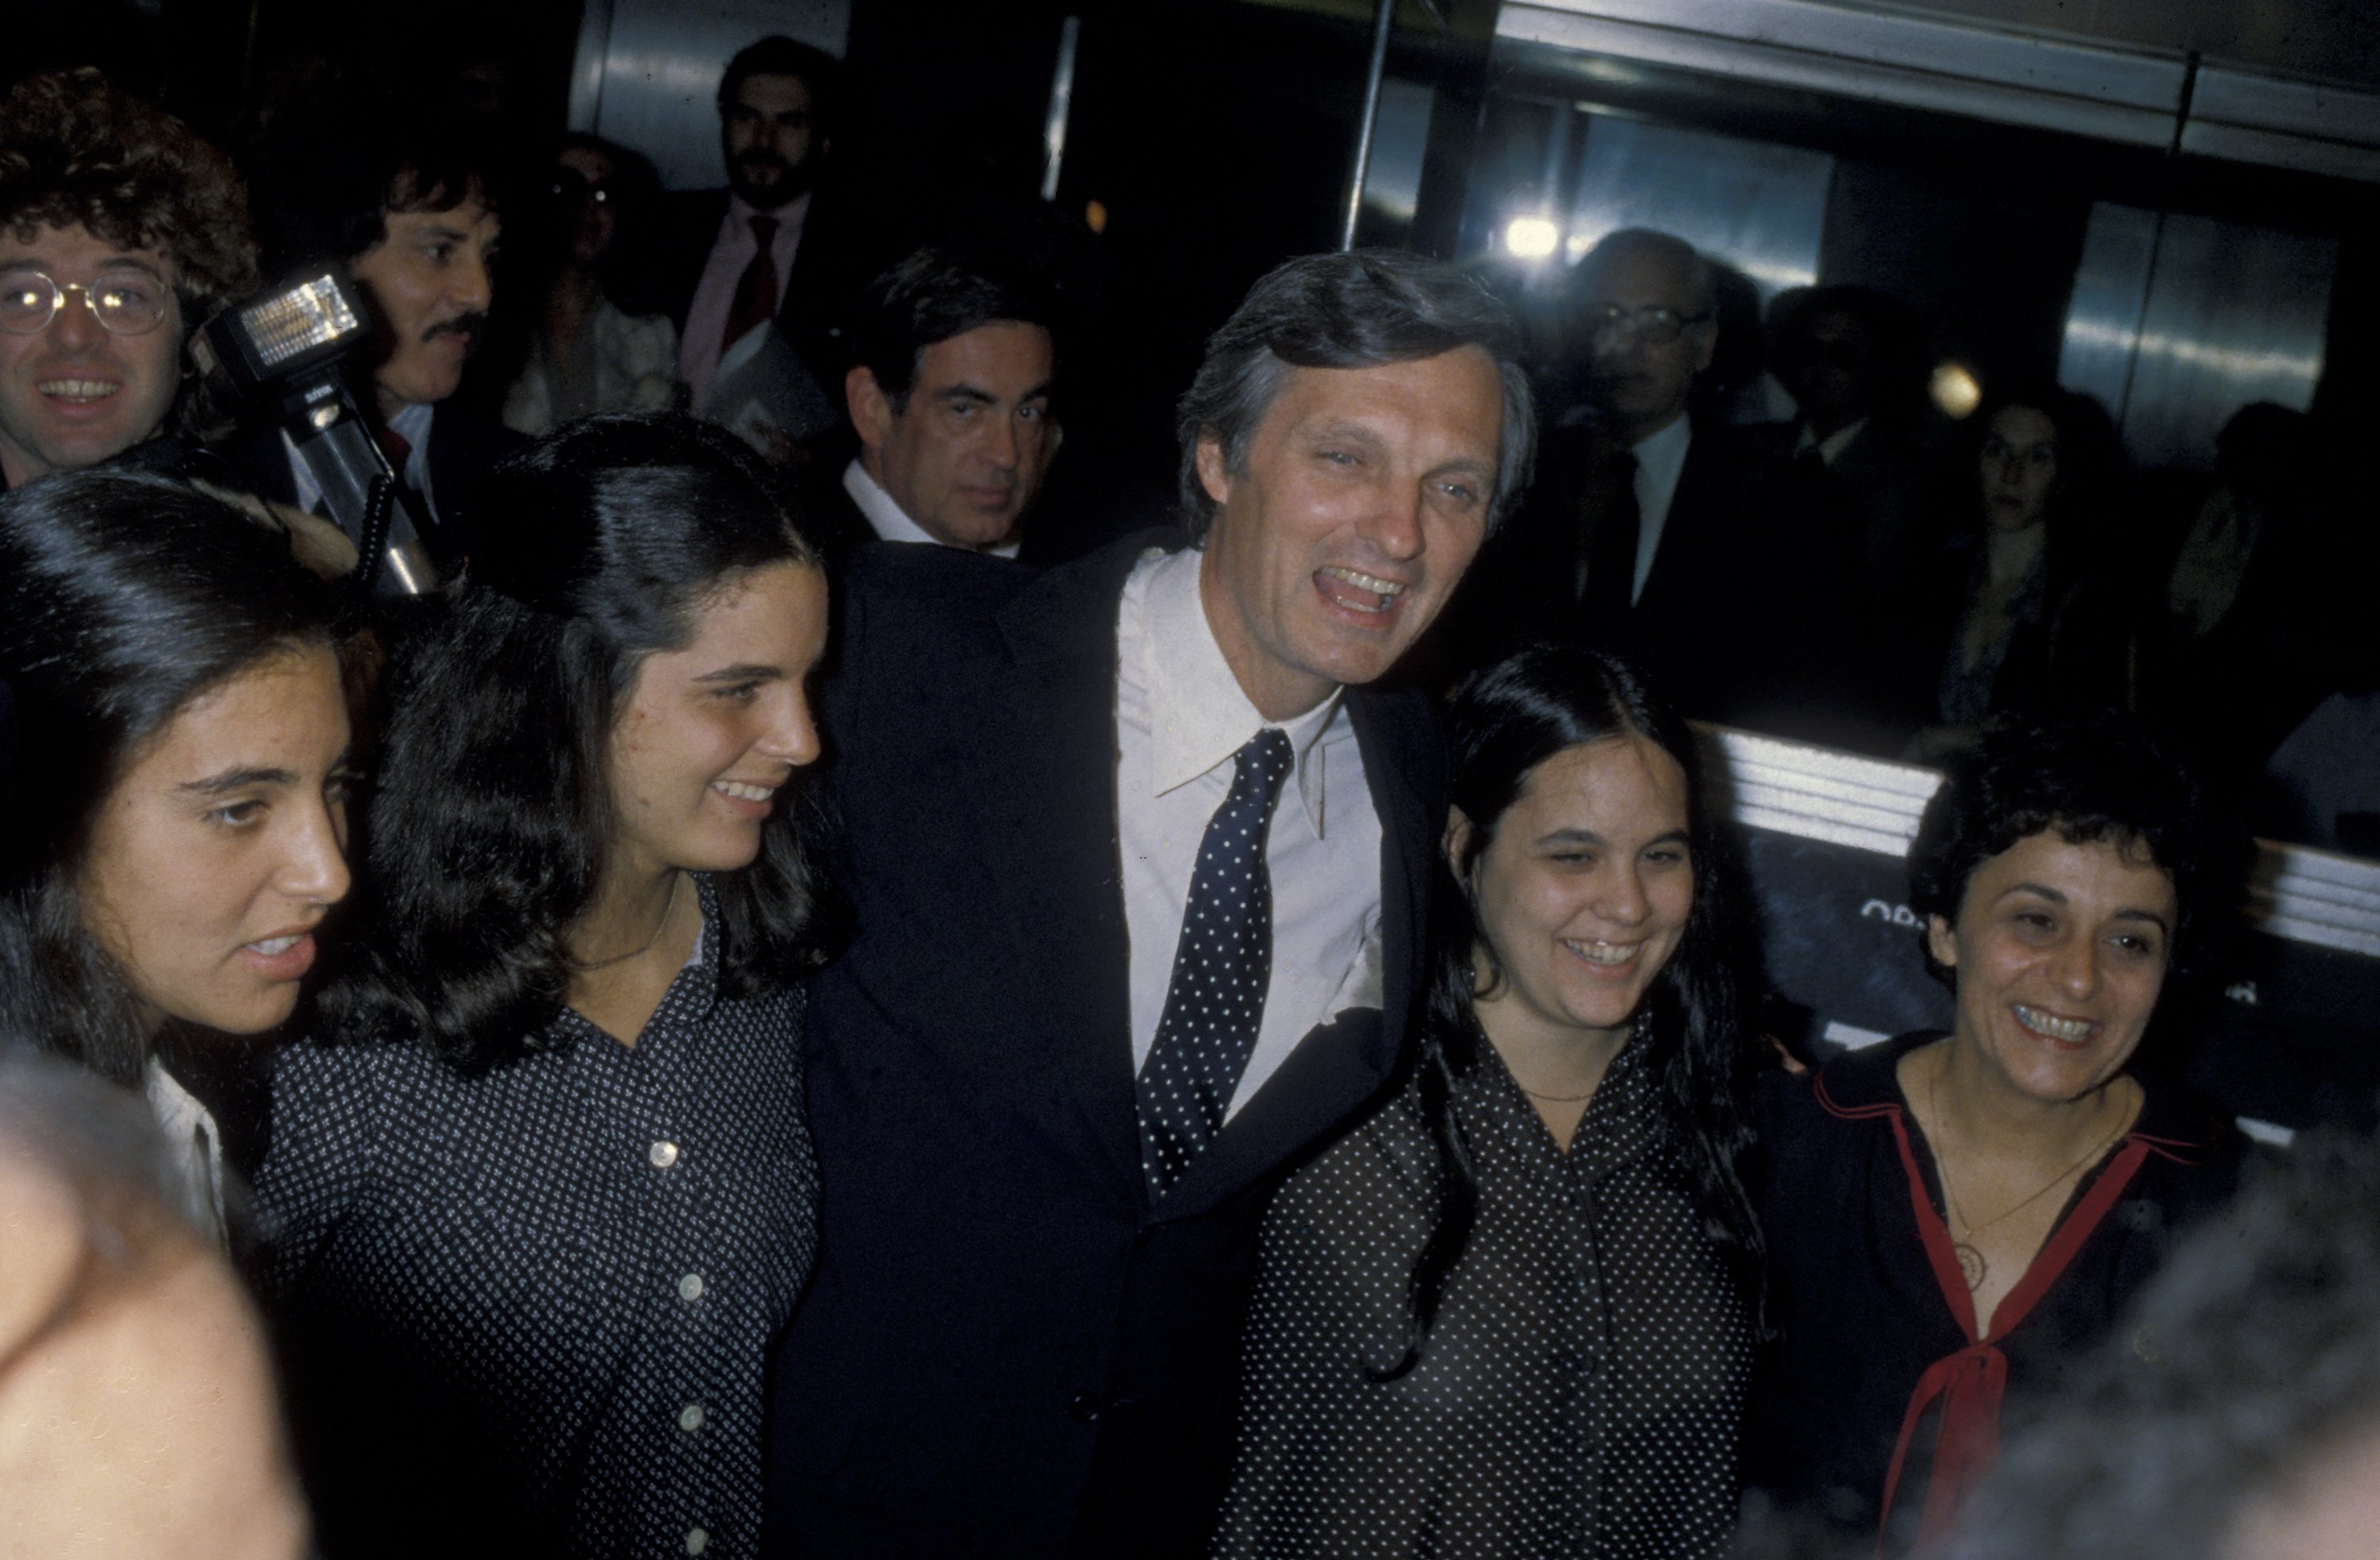 Alan Alda, Arlene Weiss and their daughters Elizabeth Alda, Eve Alda and Beatrice Alda attending 19th Birthday Party for Elizabeth Alda on August 15, 1979 at the Promenade Cafe in New York City | Source: Getty Images